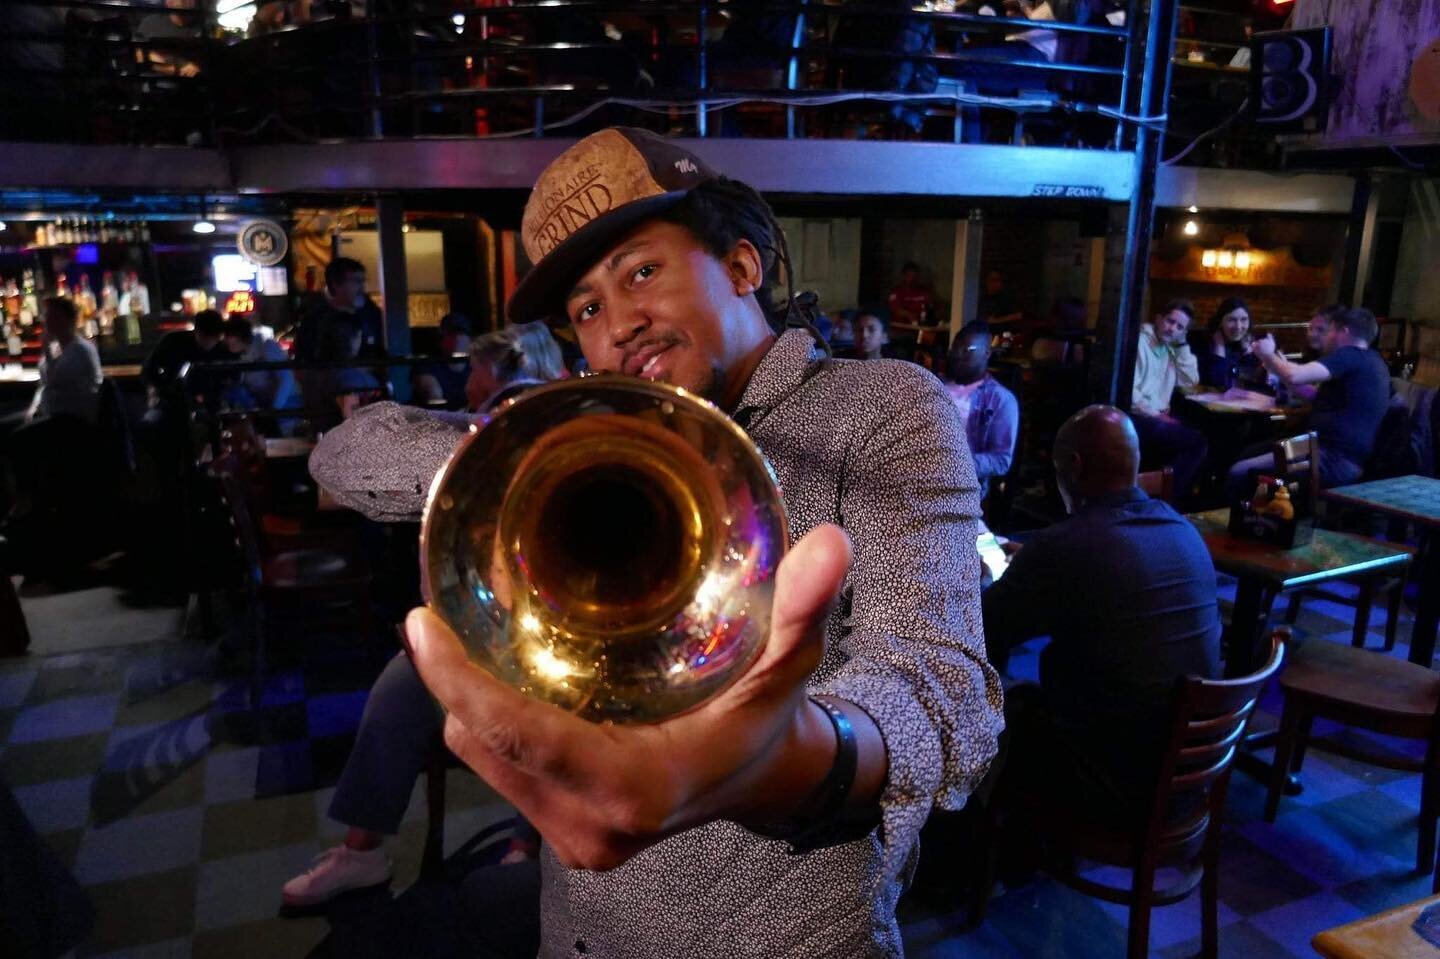 Got To Bring Some Of These Funky Brass Sounds To @bbkingsmemphis , compliments of @impatsax 

📸 @instawesomatic 

#BealeStreetsYoungestLivingLegend #BealeStreetHorns #BealeStreetBrass #BealeSt #BealeStreet #MemphisMusicians #TouringMusician #WorldTr